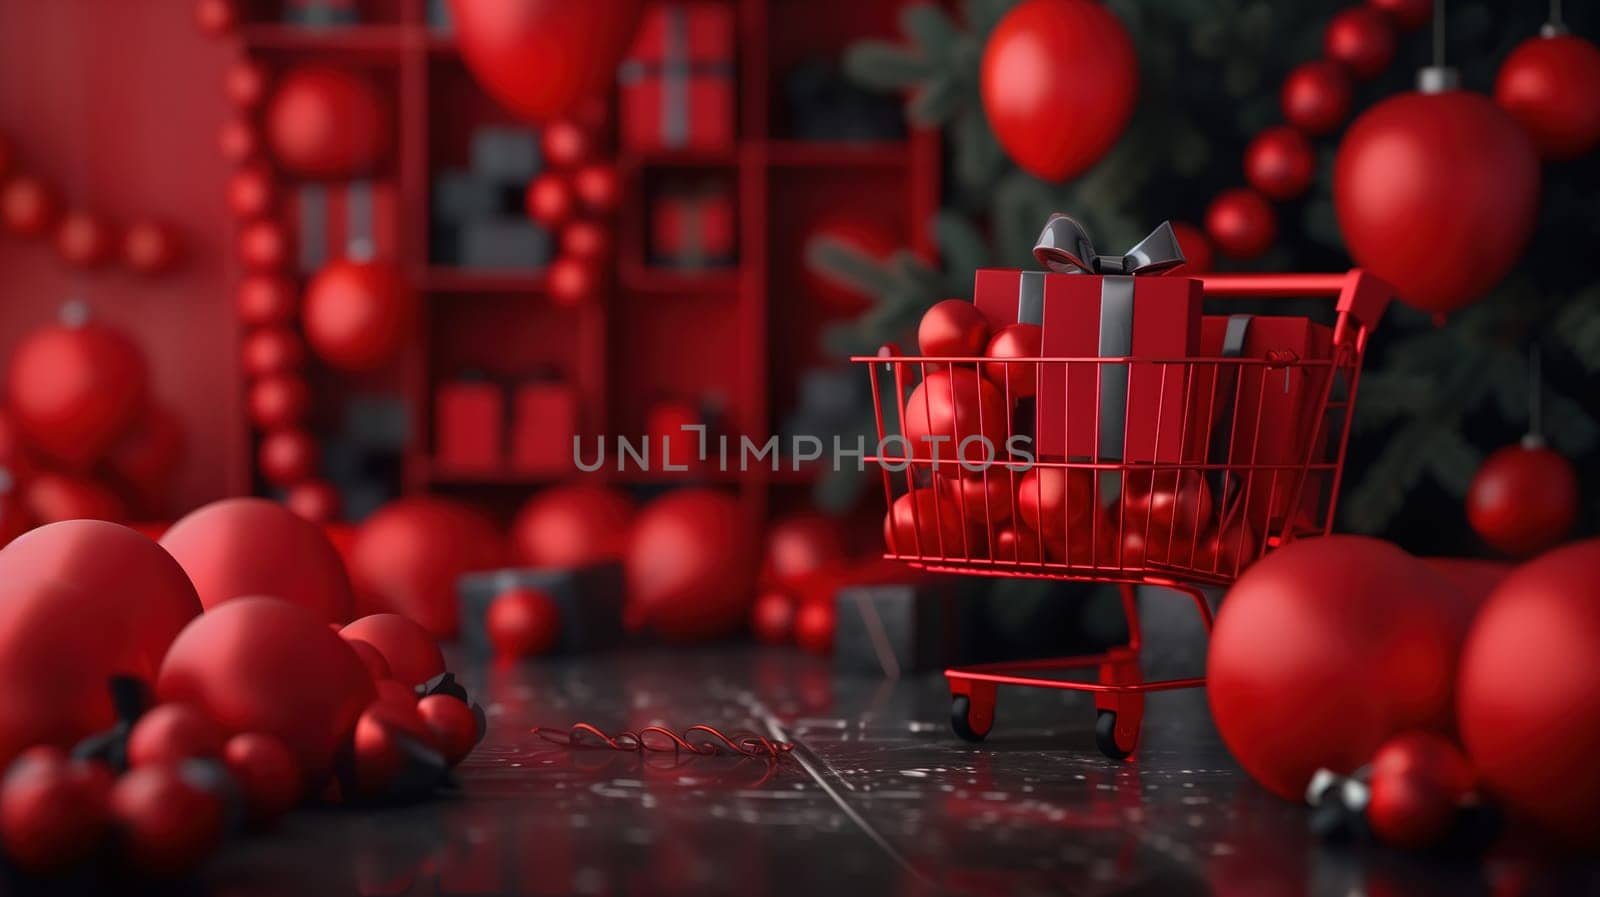 A bright red shopping cart is positioned in front of a festive Christmas tree, symbolizing the sale and Black Friday shopping concept. The cart is empty, ready to be filled with holiday gifts and decorations.